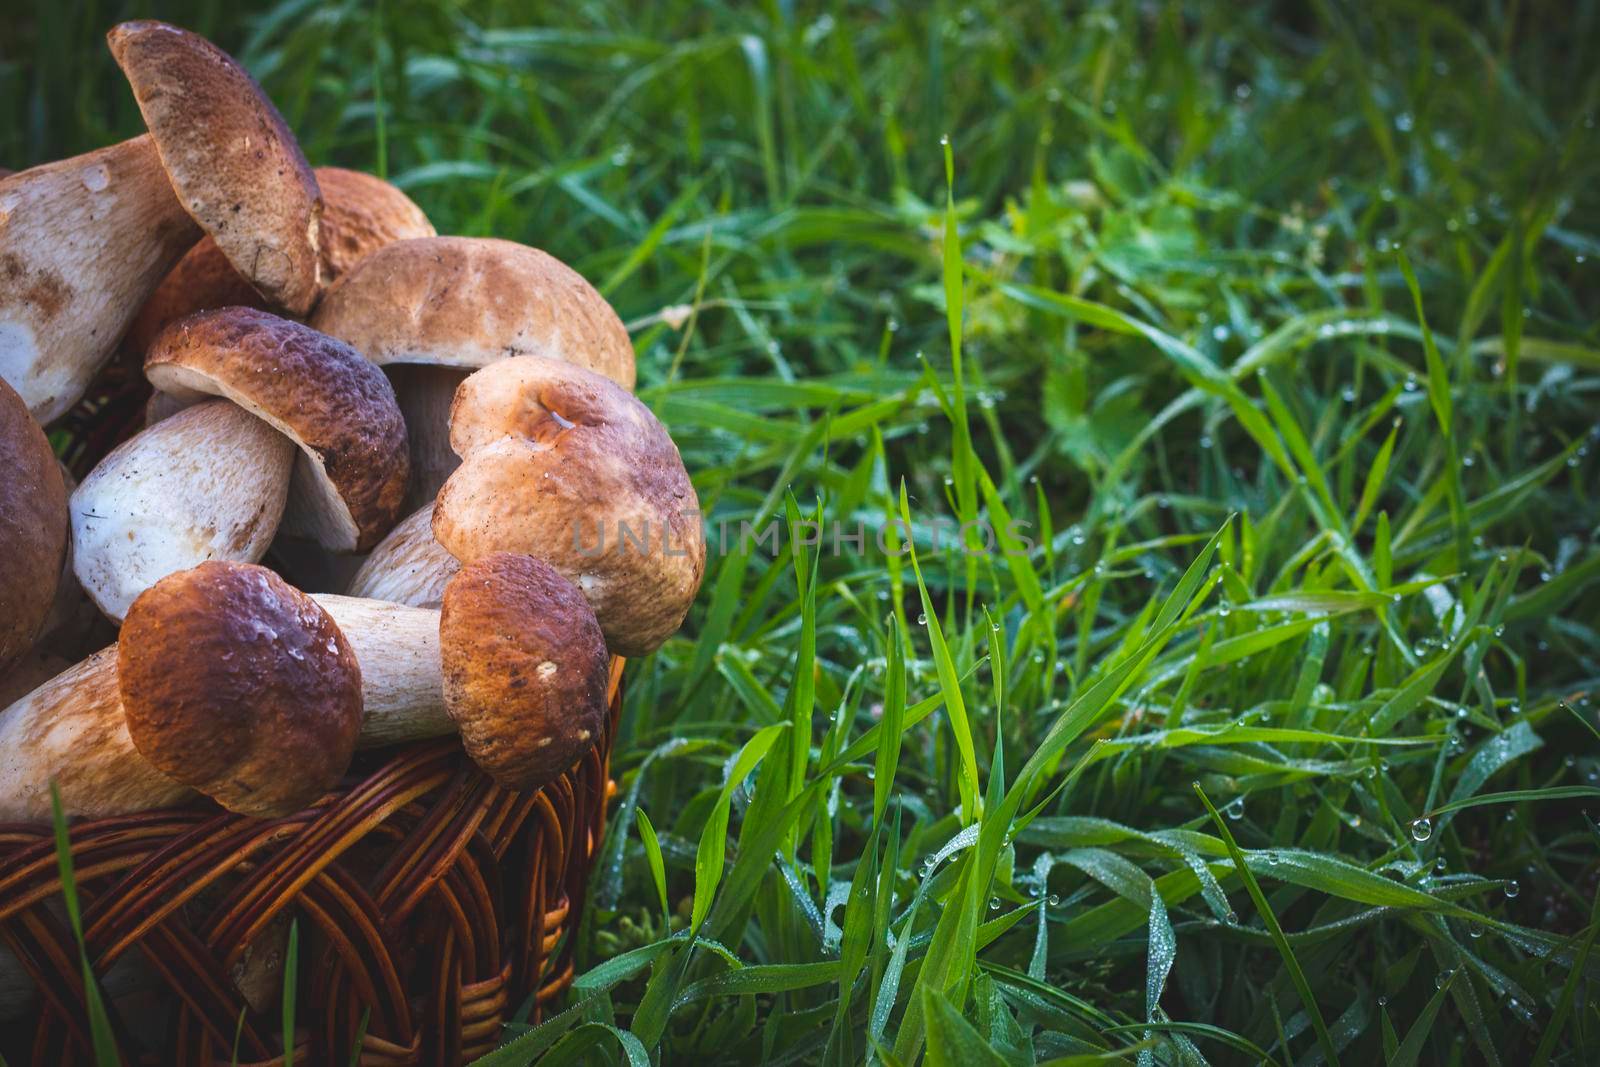 cep mushrooms in basket and wet grass by romvo